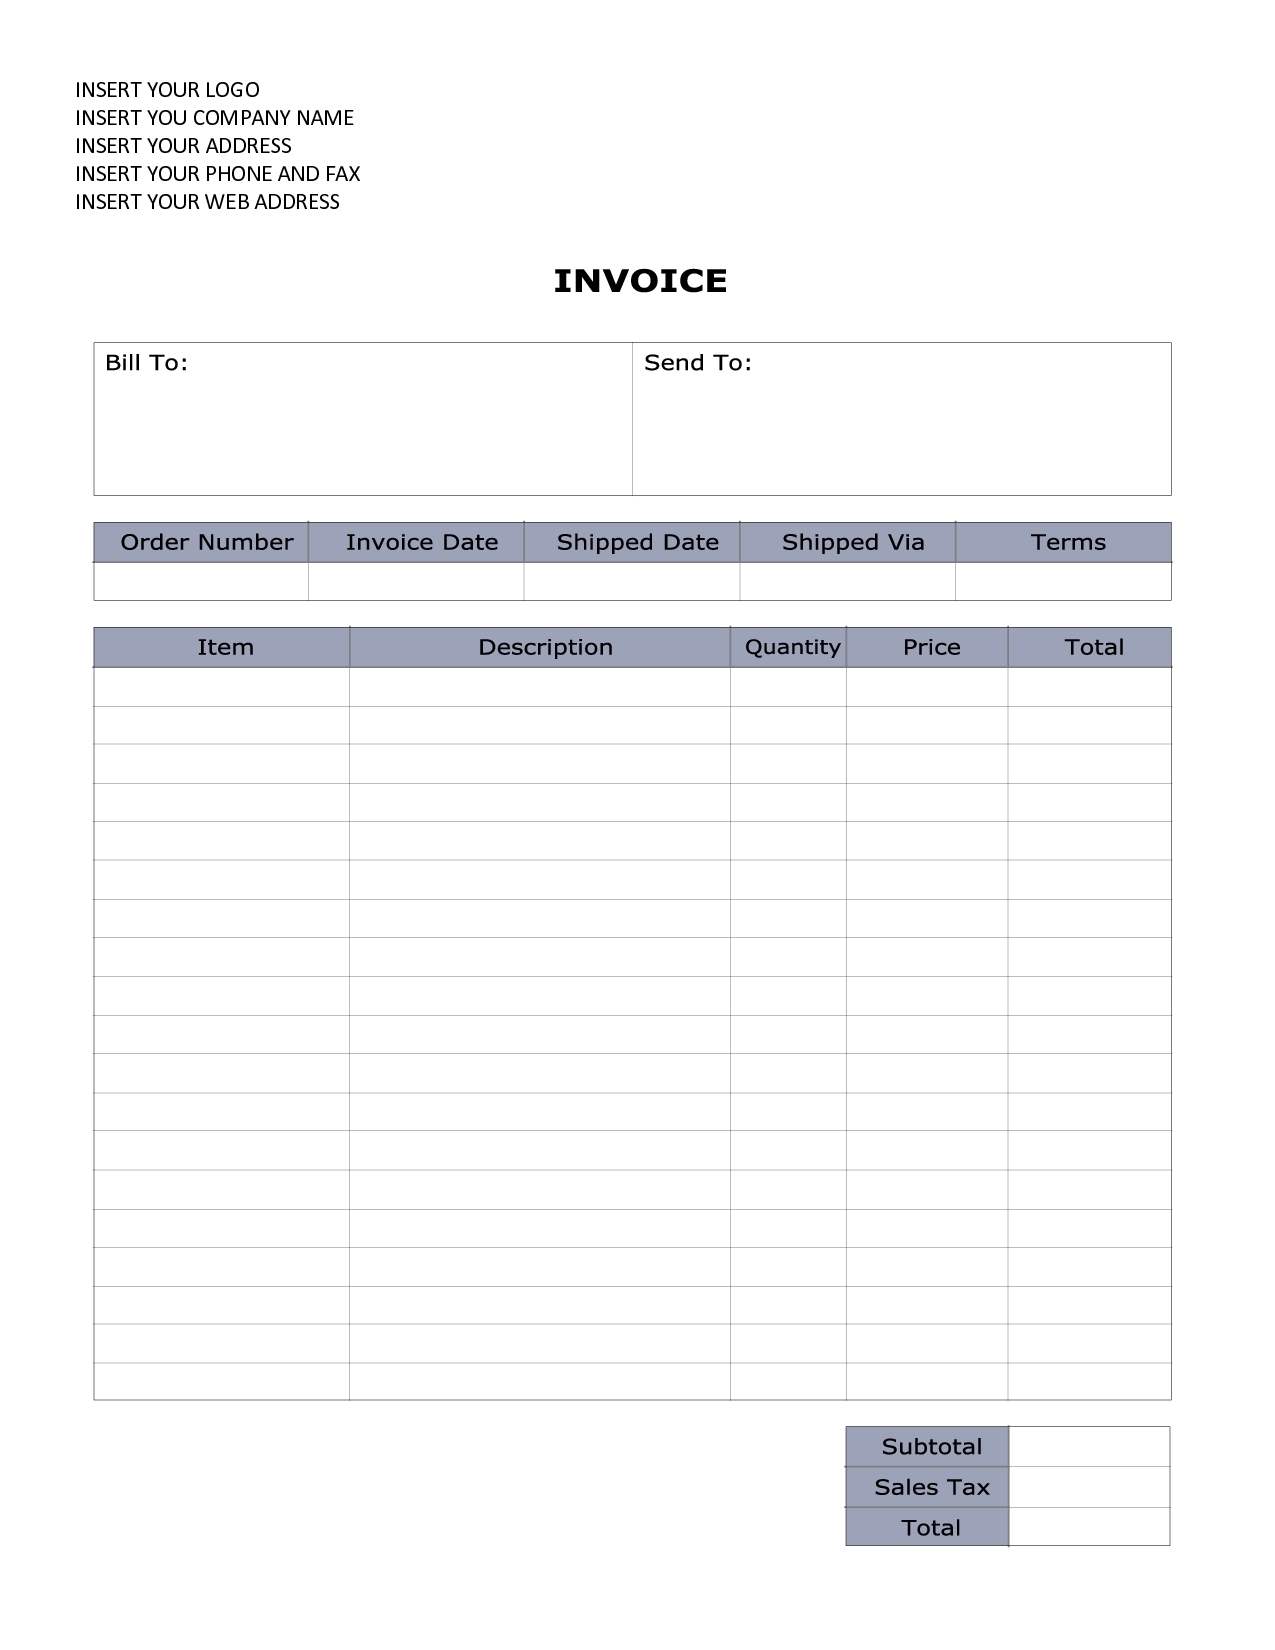 sample invoices in word format invoice template free 2016 invoice in word format